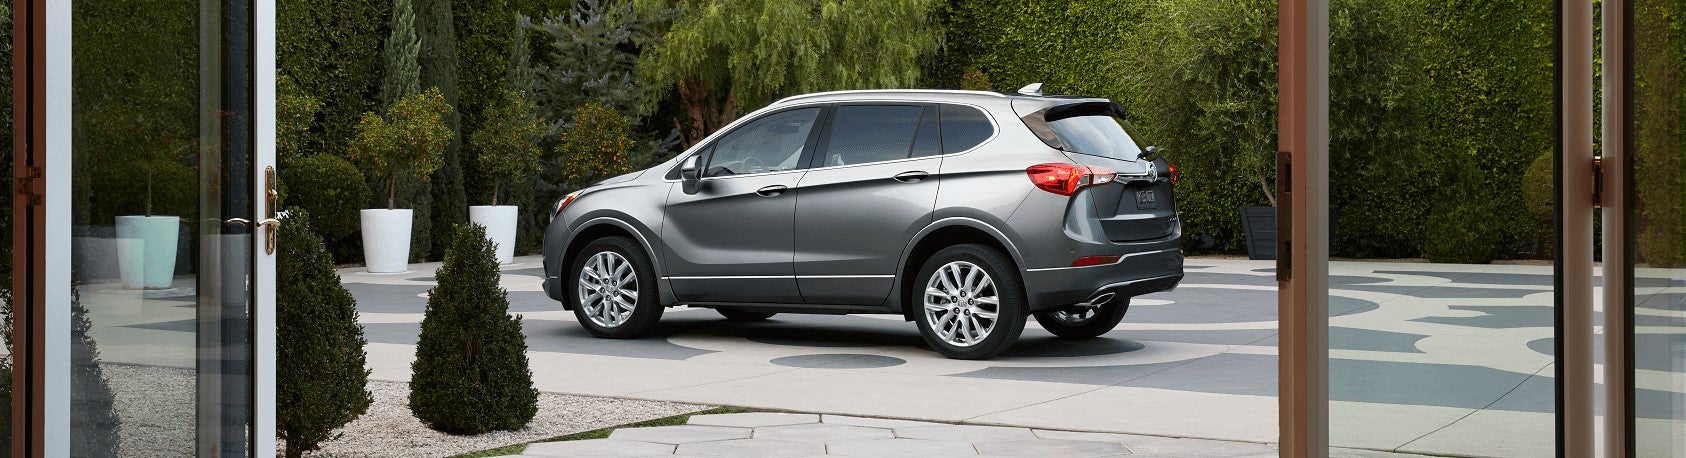 Buick Envision for Sale Anderson IN 